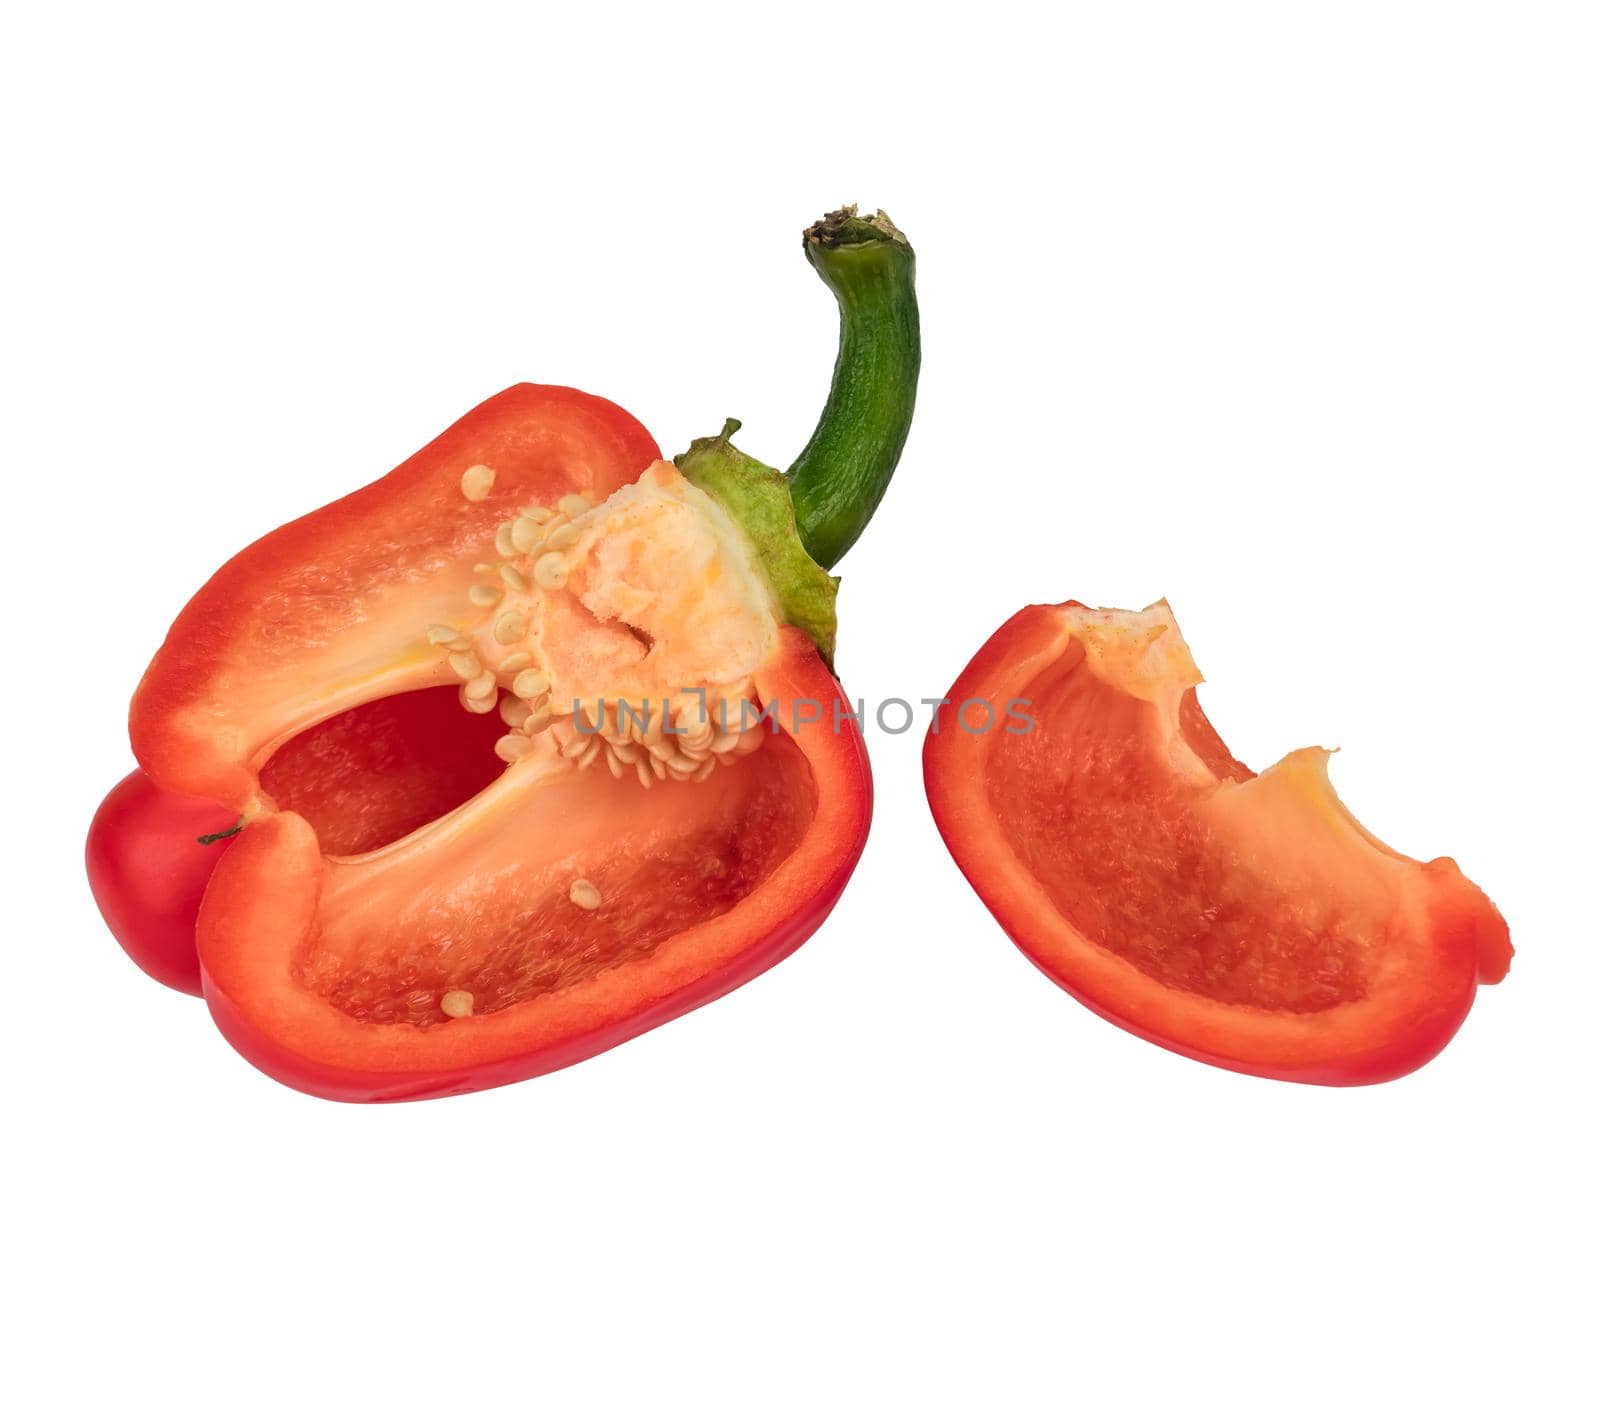 Ripe sweet red peppers, cut into pieces, on a white background